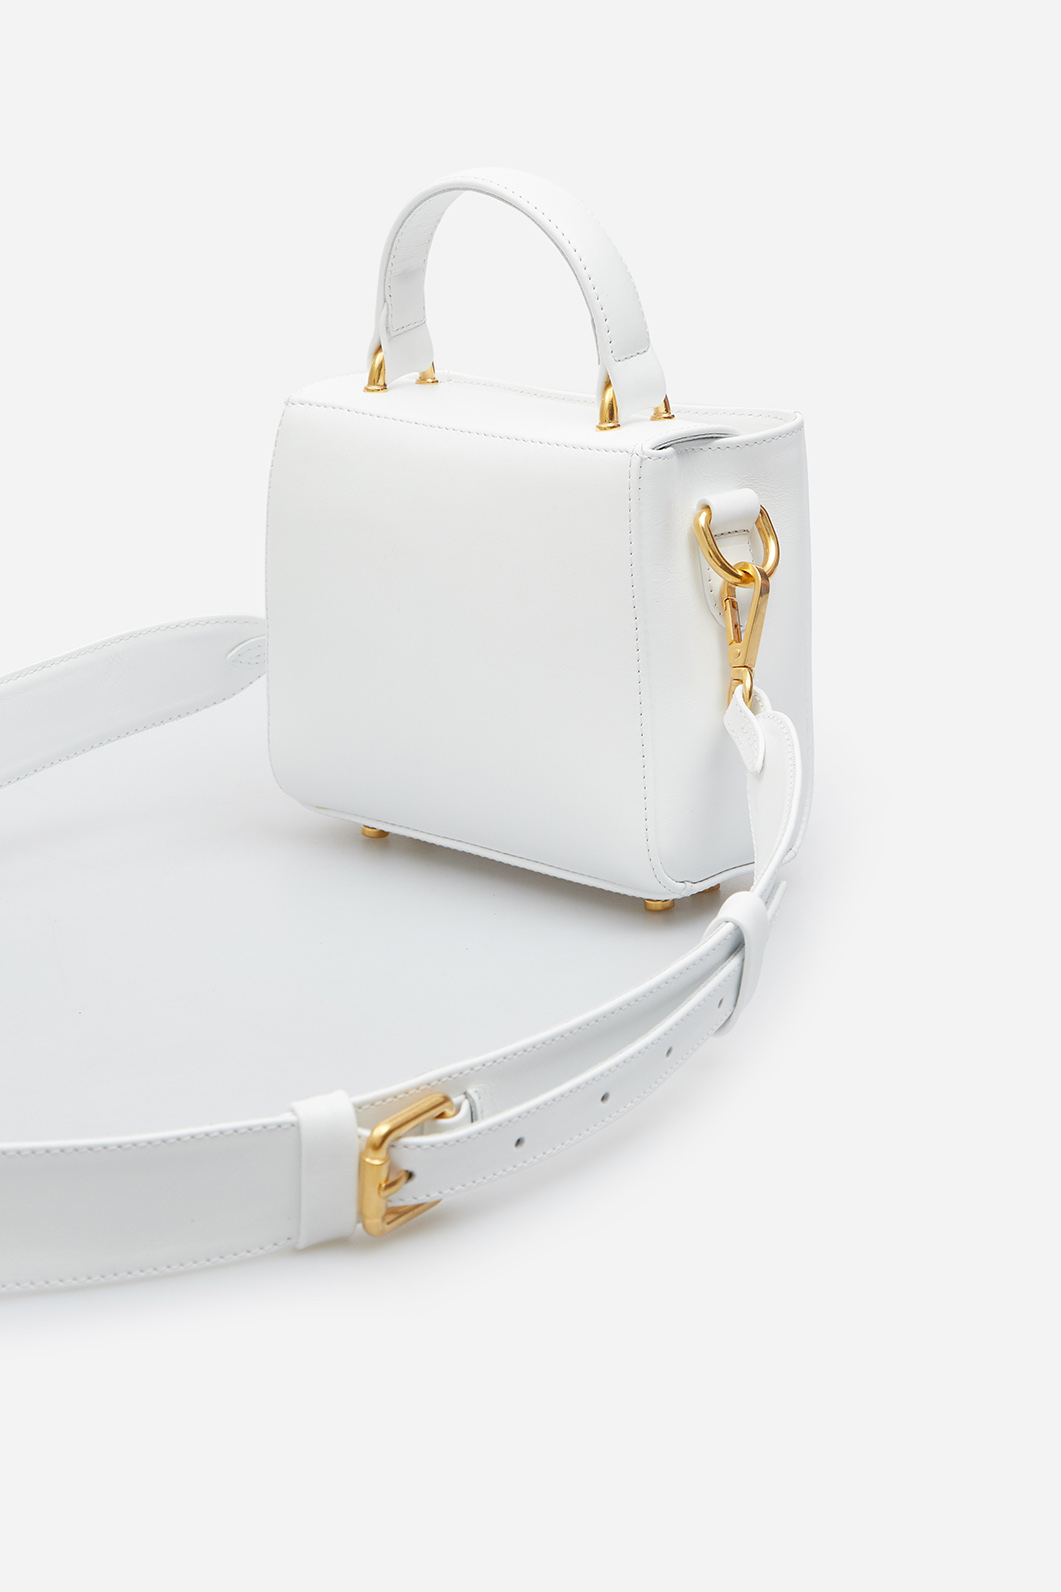 Erna micro RS white leather
city bag /gold/